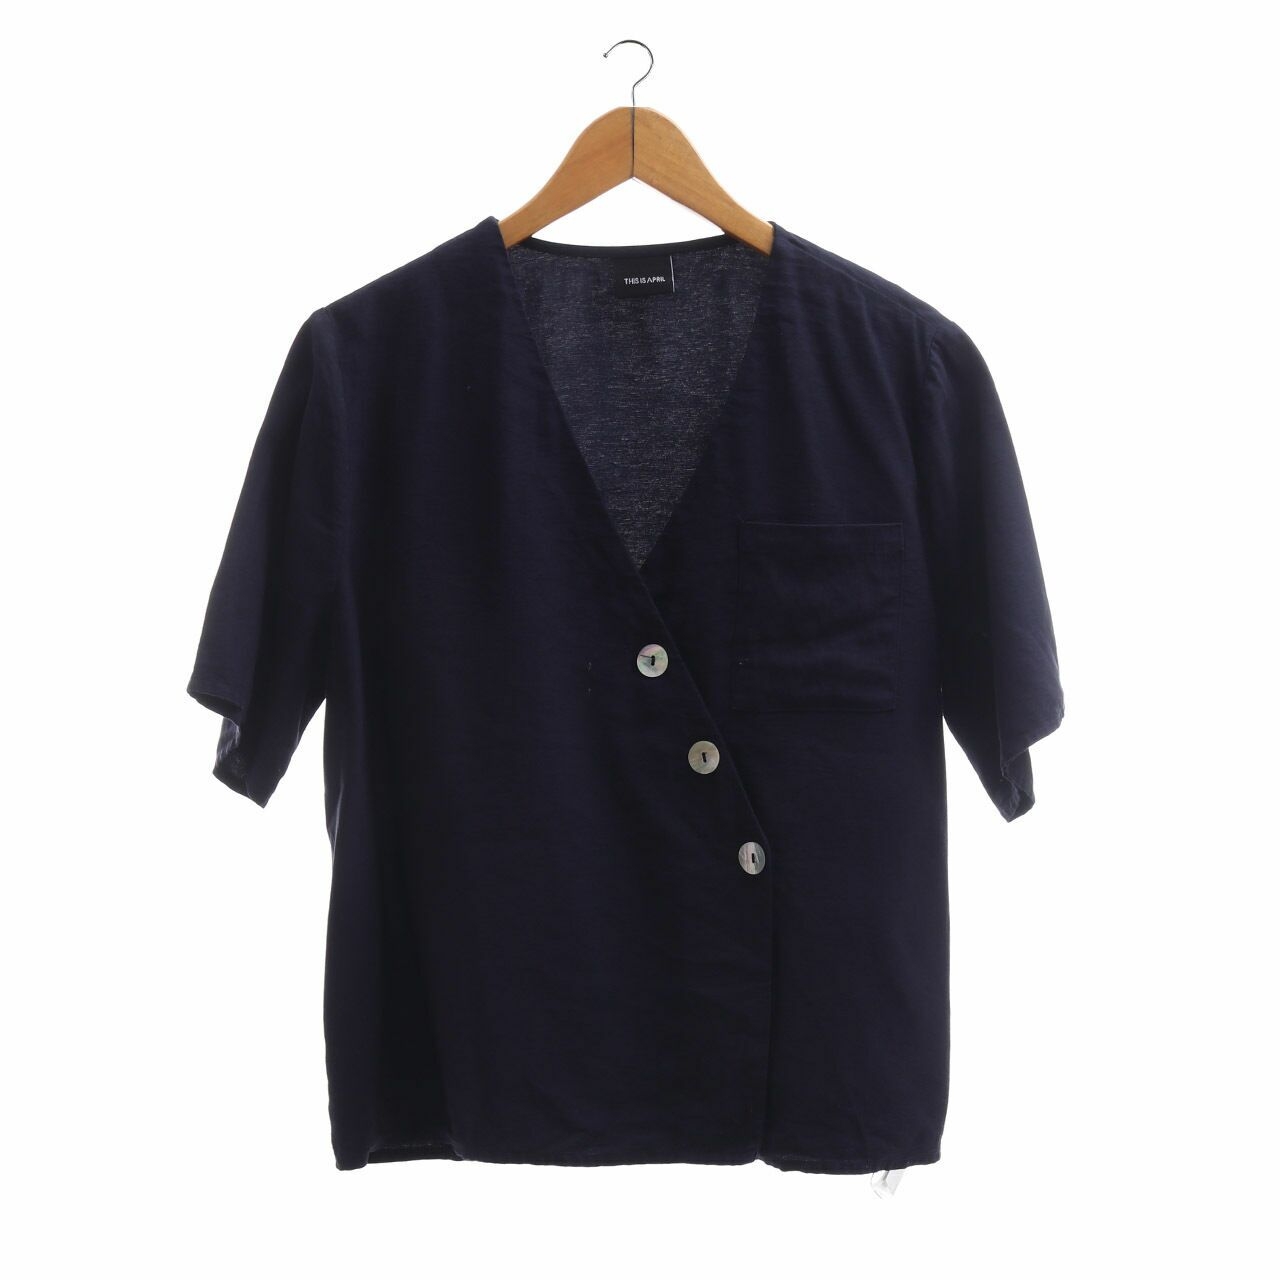 This is April Navy Blouse